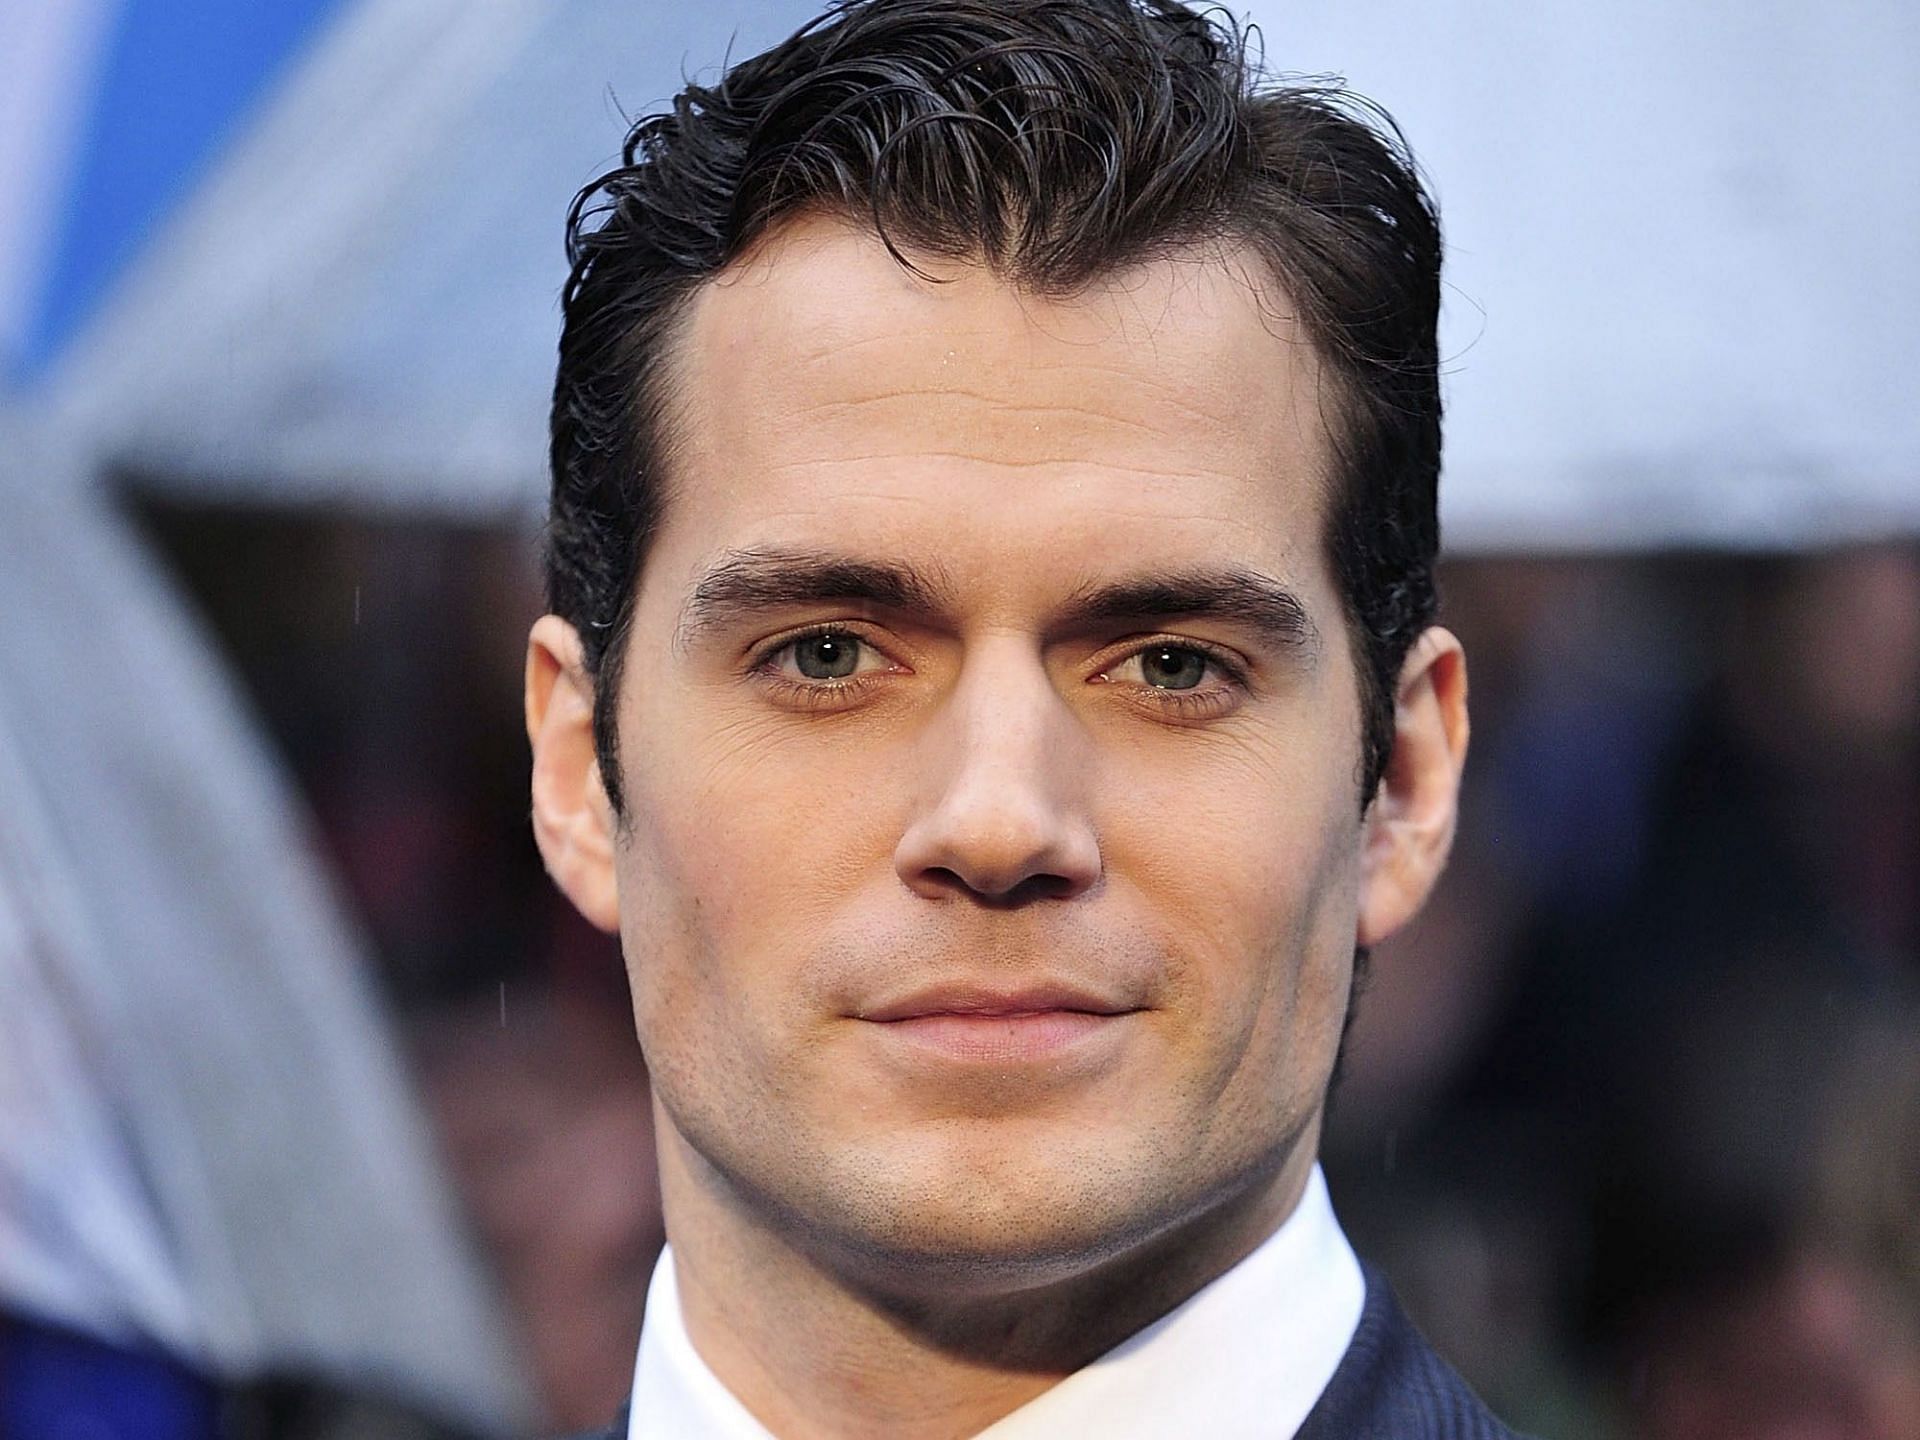 Will Henry Cavill return in The Witcher Season 3?